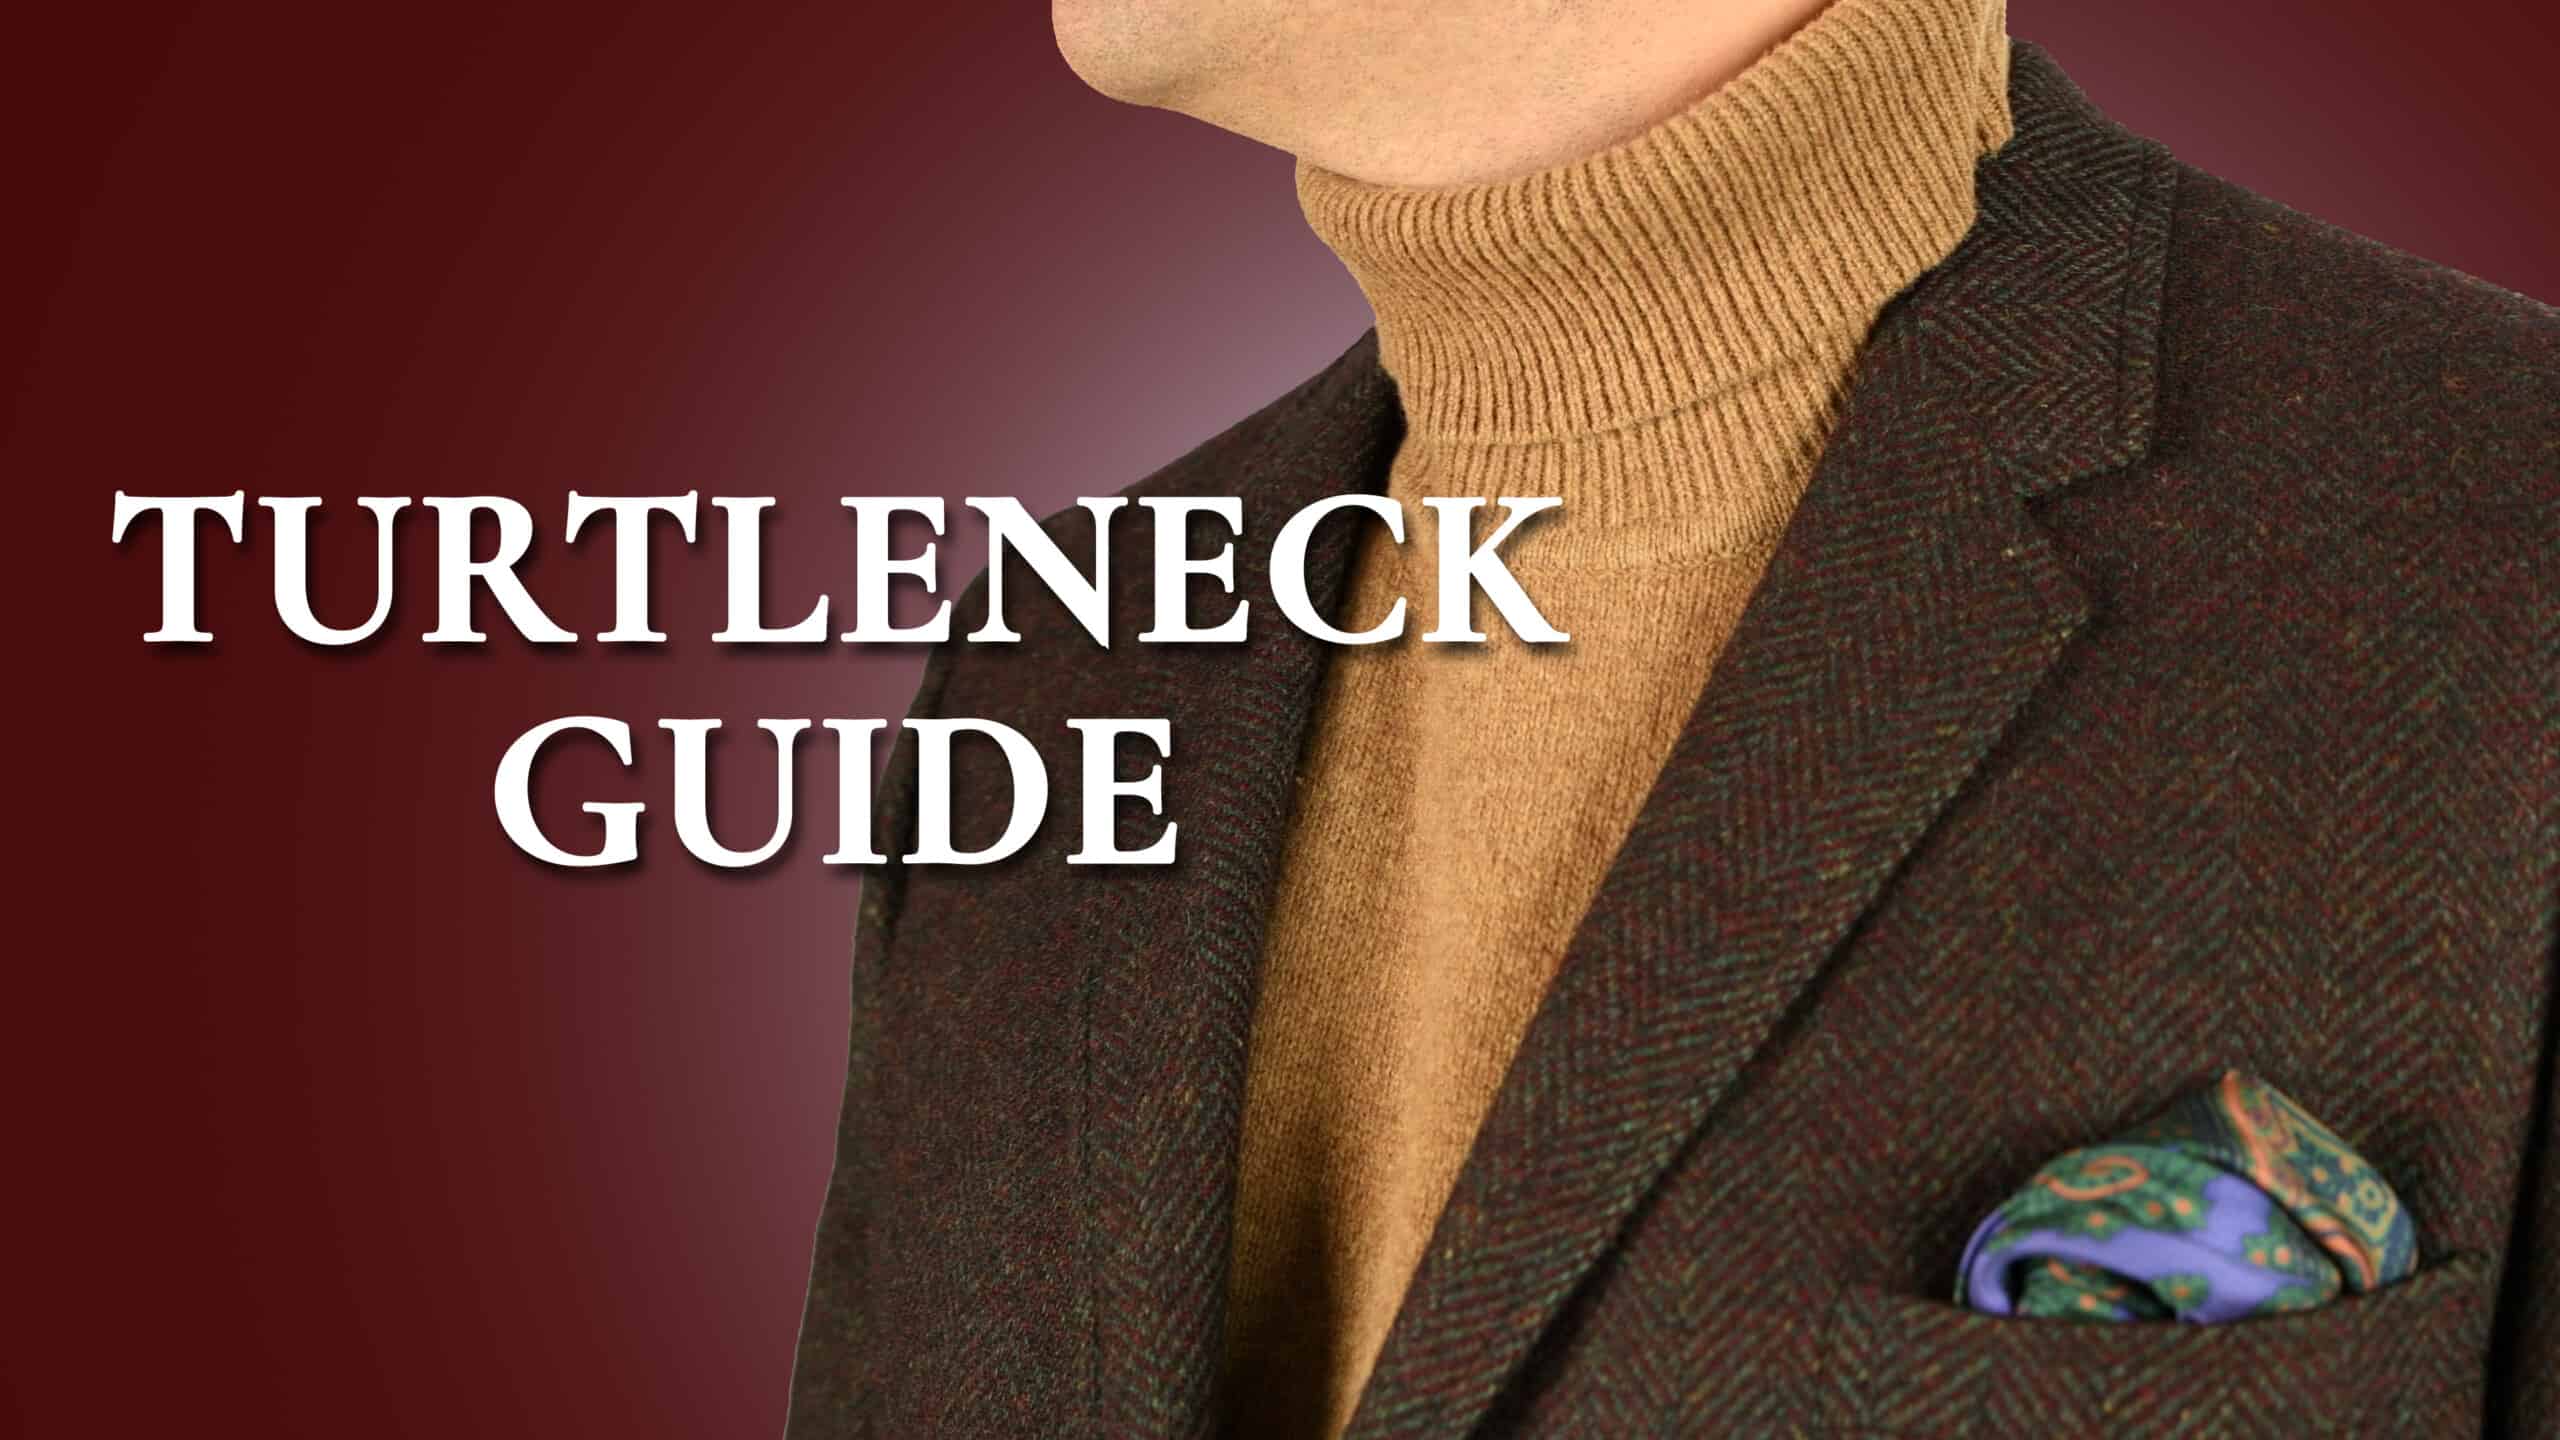 How to Wear a Turtleneck with a Suit - Updated for 2023!